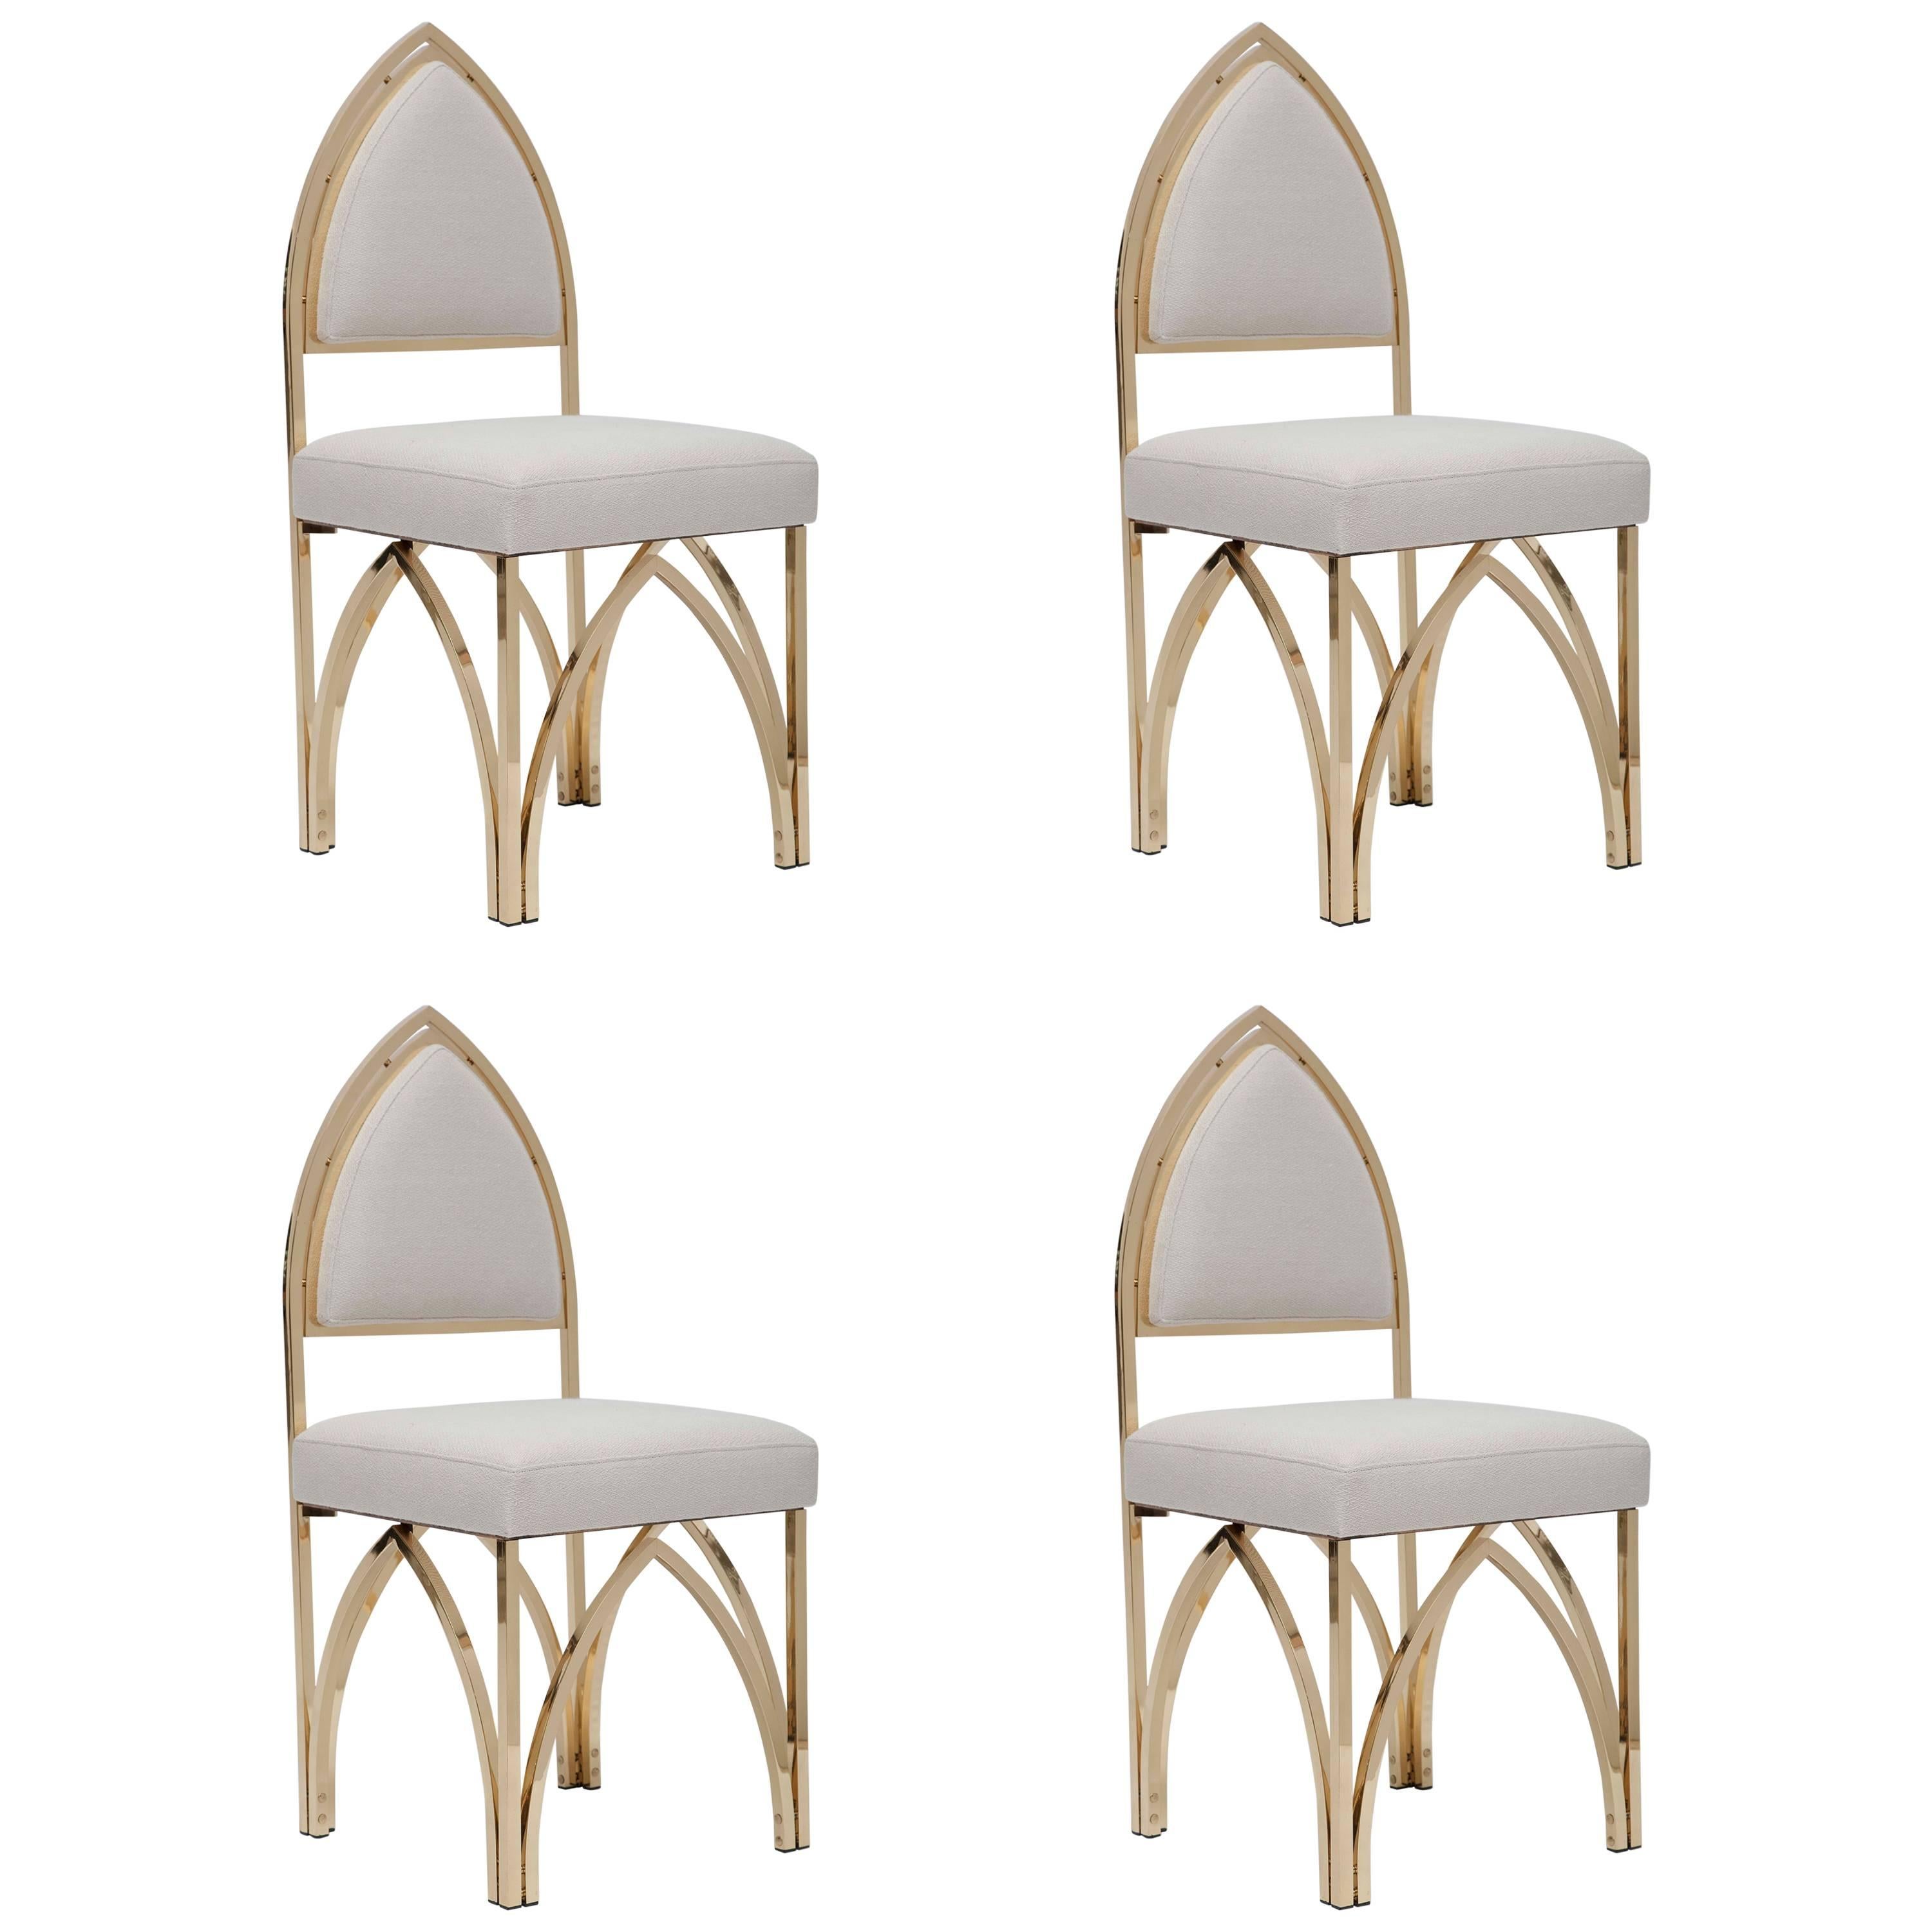 Two Pairs of Gothic Inspired Polished Brass Chairs, Italy Circa 1970